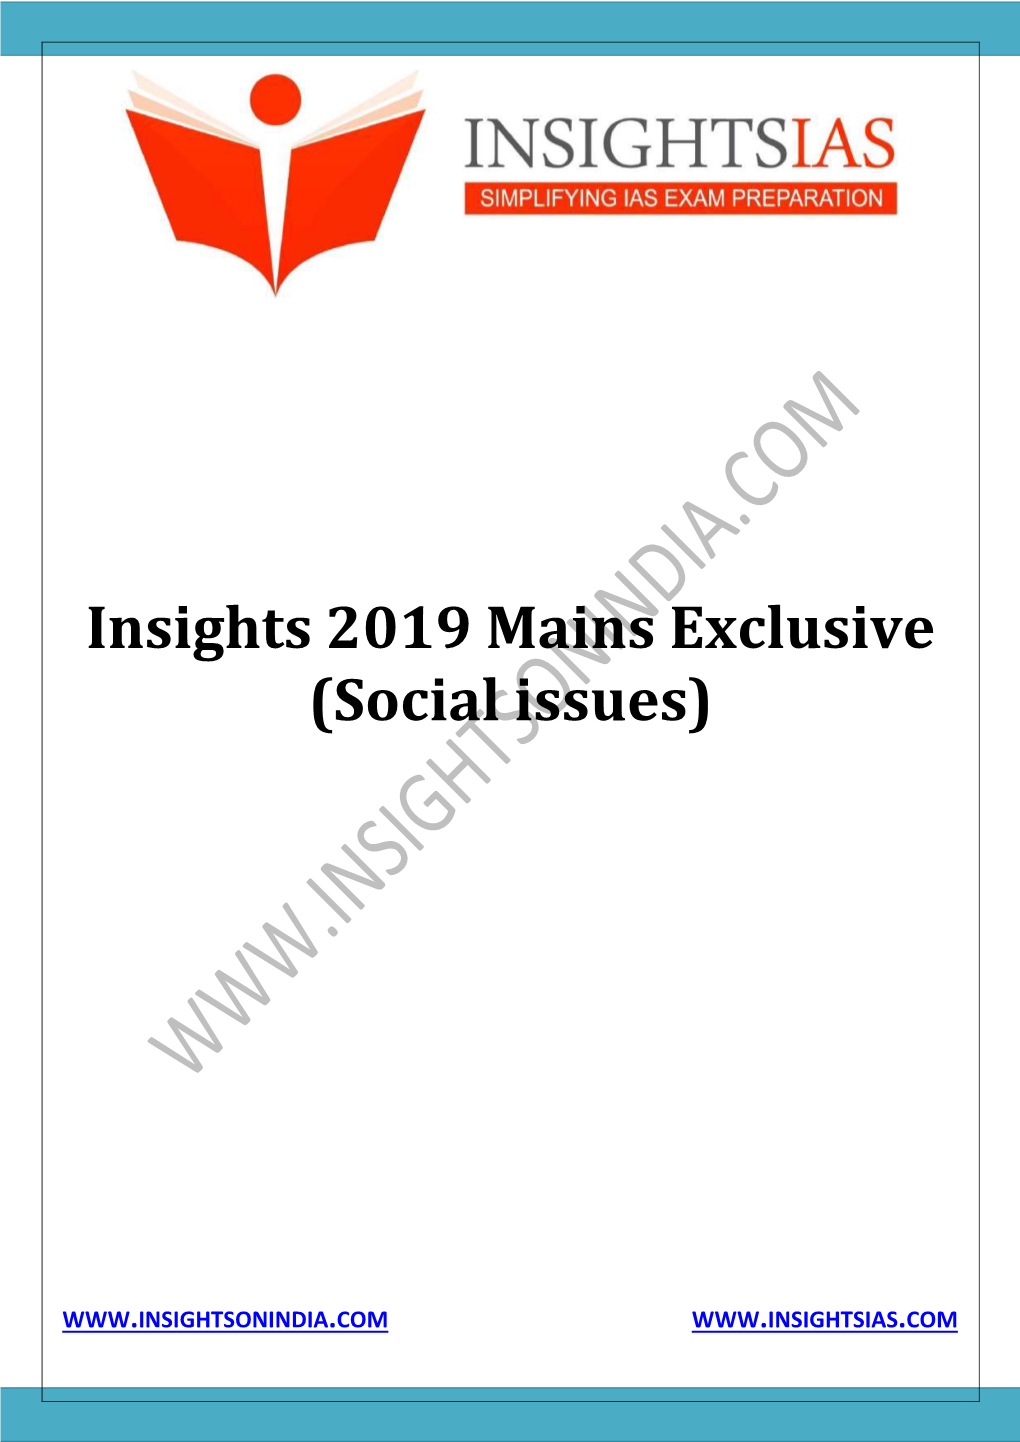 Insights 2019 Mains Exclusive (Social Issues)